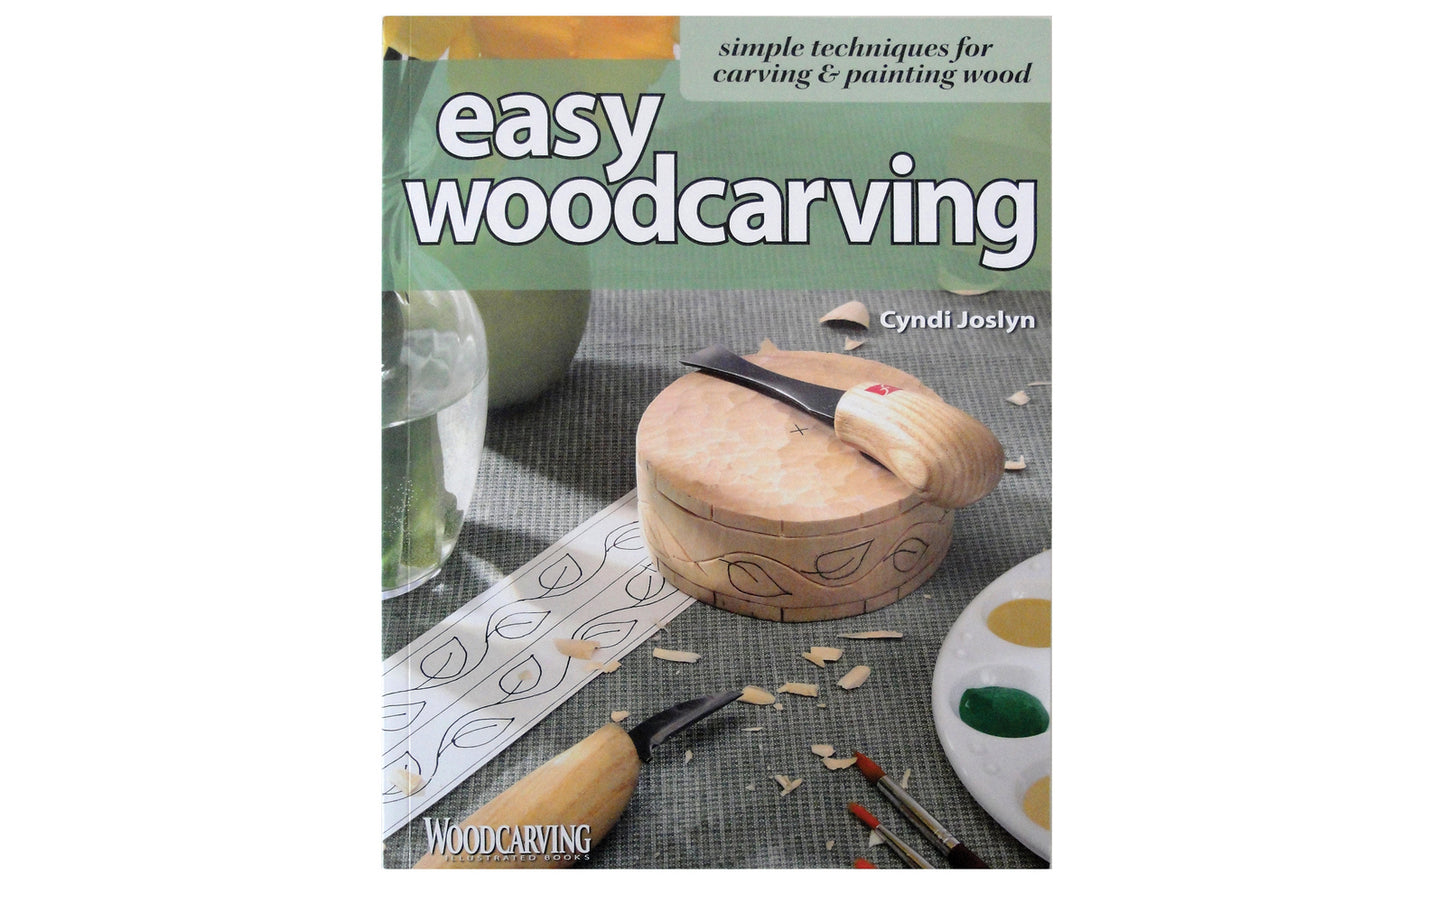 Woodcarving Book - The essentials of tool selection, maintenance & wood varieties - Techniques for carving  basic shapes, such as cylinders, ball, & cubes - Easy to use patterns similar to those used in fiber arts - bonus sewing projects - Comprehensive Wood Carving Book - Soft Cover - 868924003481 - IN200